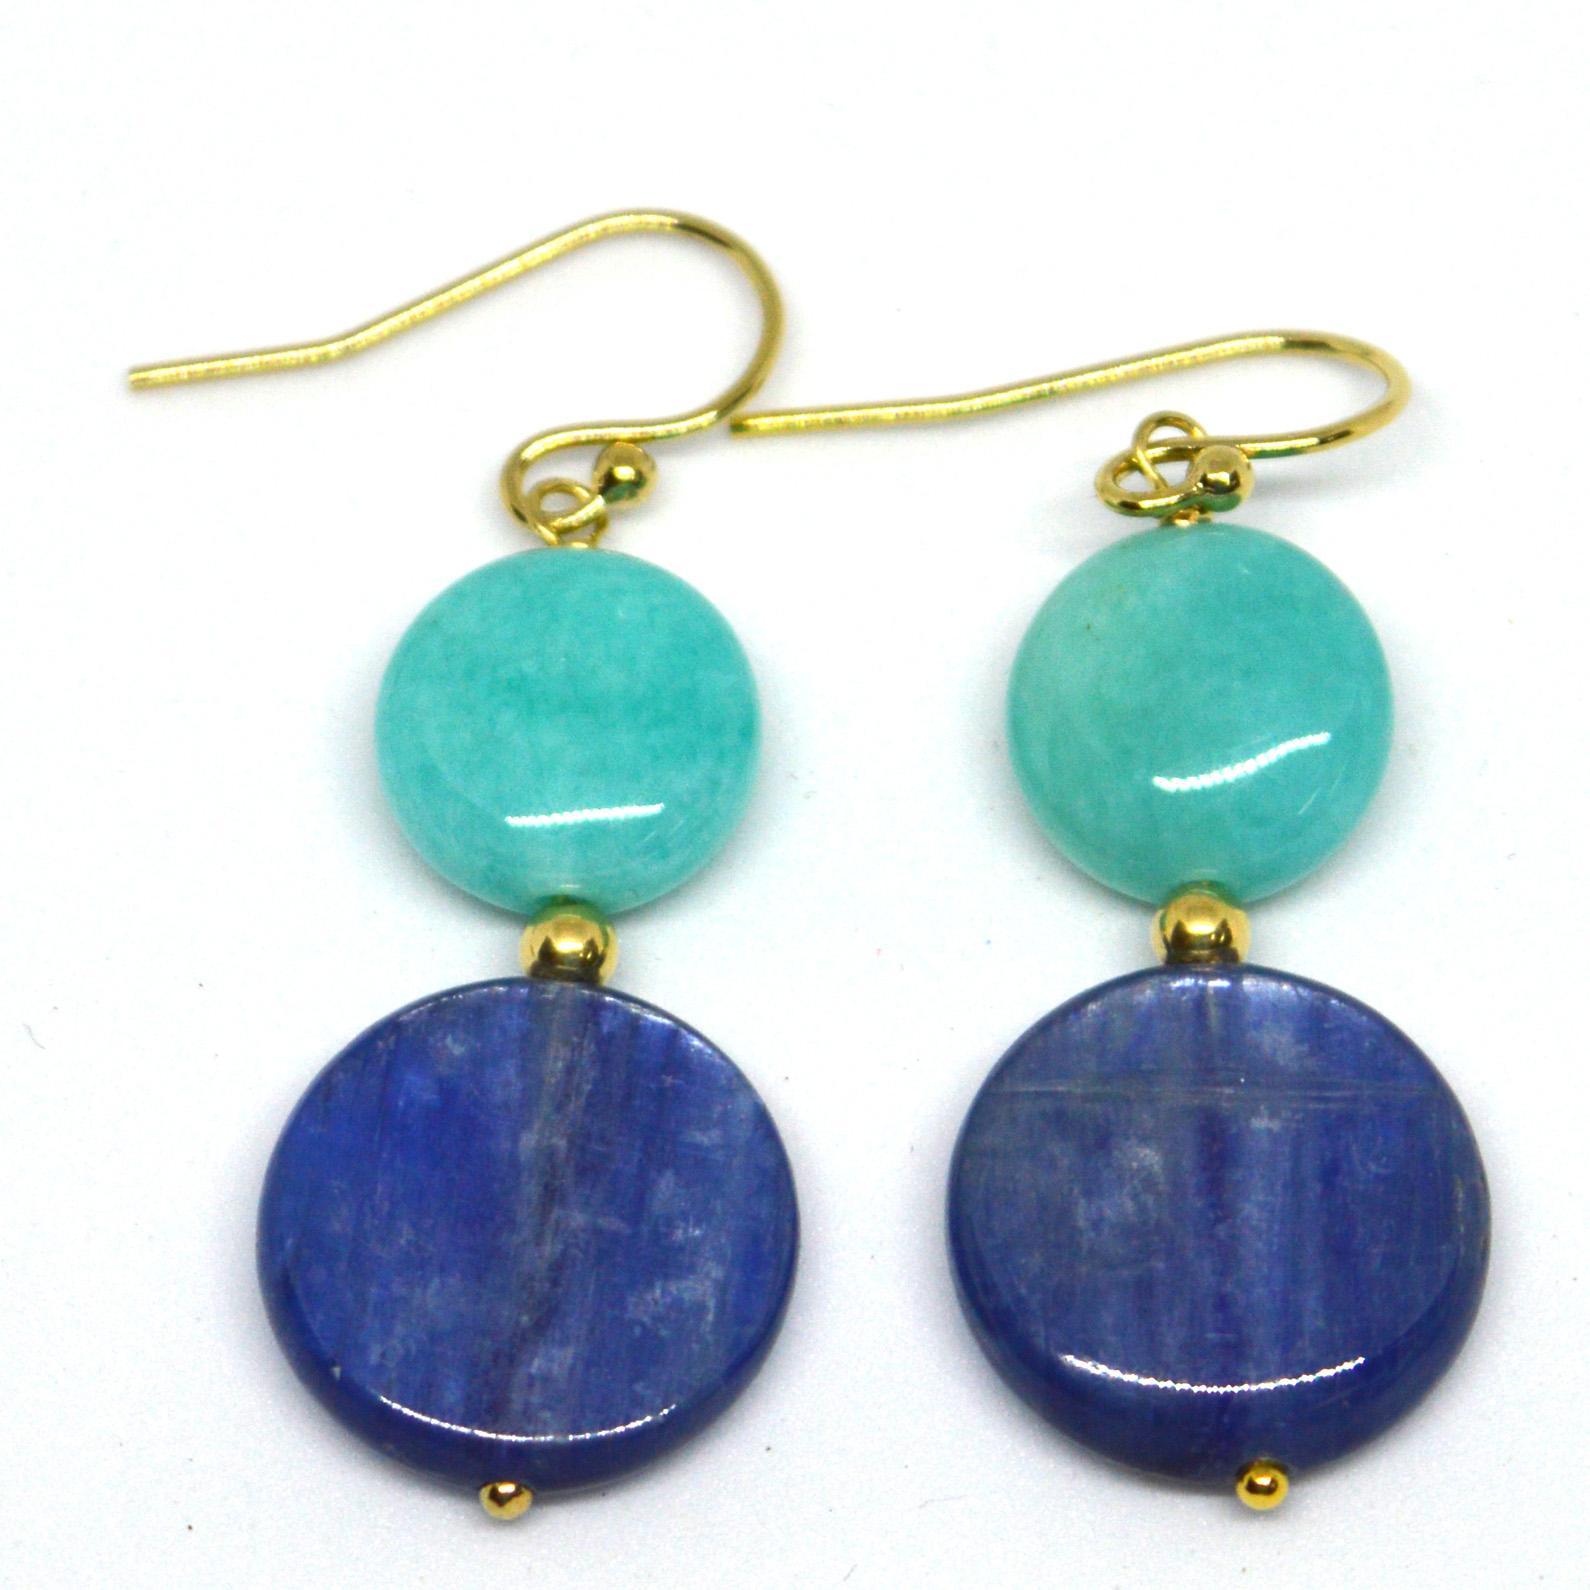 Beautiful blue earrings with 16mm Kyanite and 12mm Peruvian Amazonite 3A with a 14k Gold Filled Headpin, bead and Sheppard.

Total Earring length 44mm.